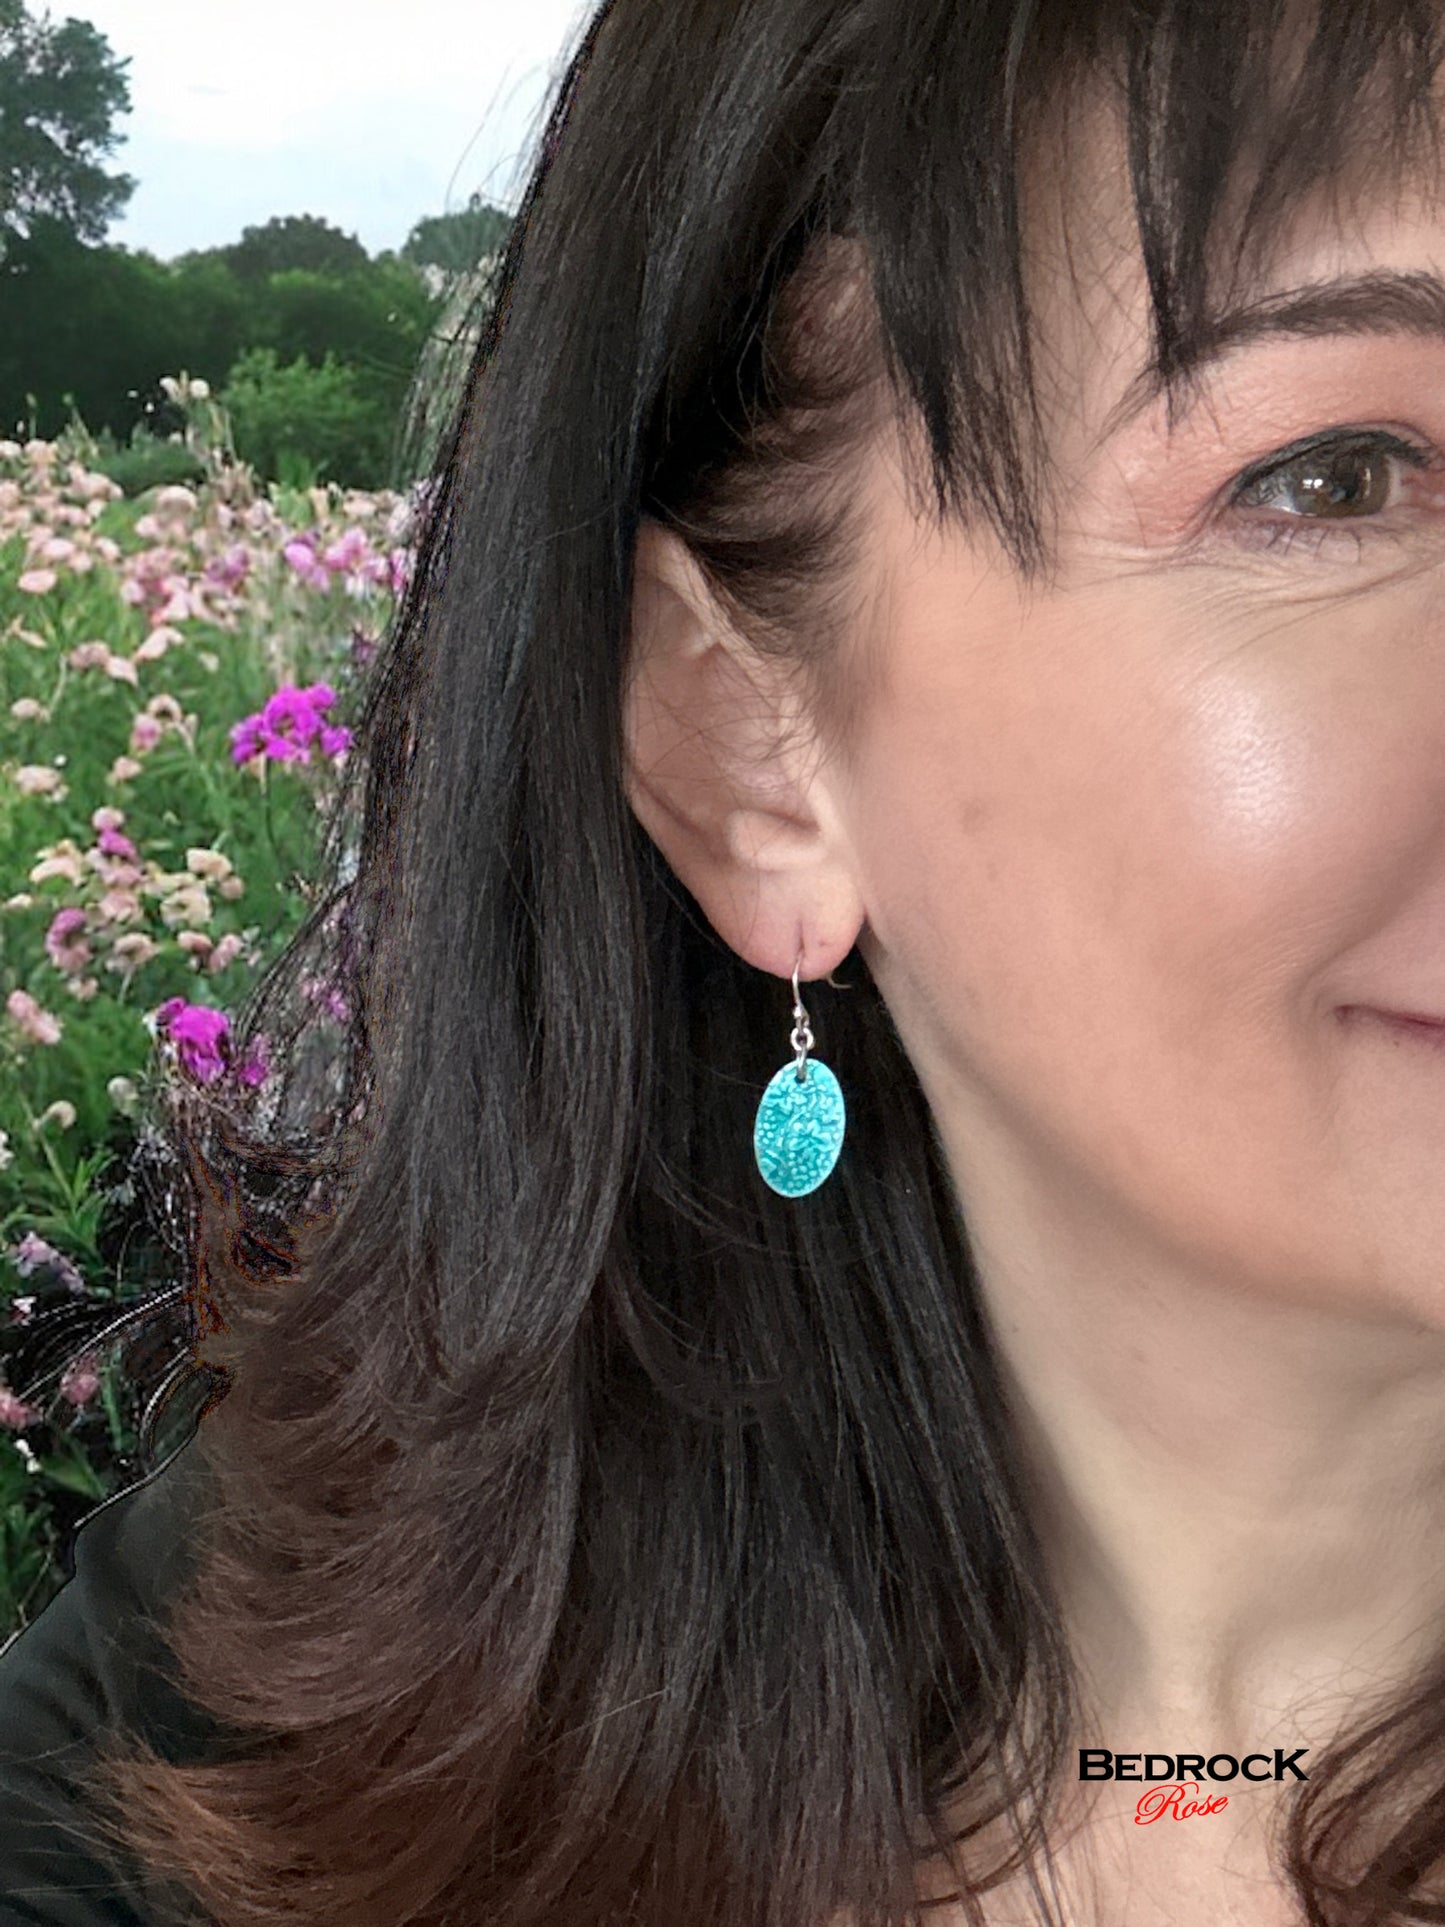 Teal earrings, grape pattern jewelry, nature-inspired accessories, whimsical fashion earrings, contemporary jewelry design, lightweight statement earrings, teal color trends, grape-inspired fashion earrings, handmade jewelry